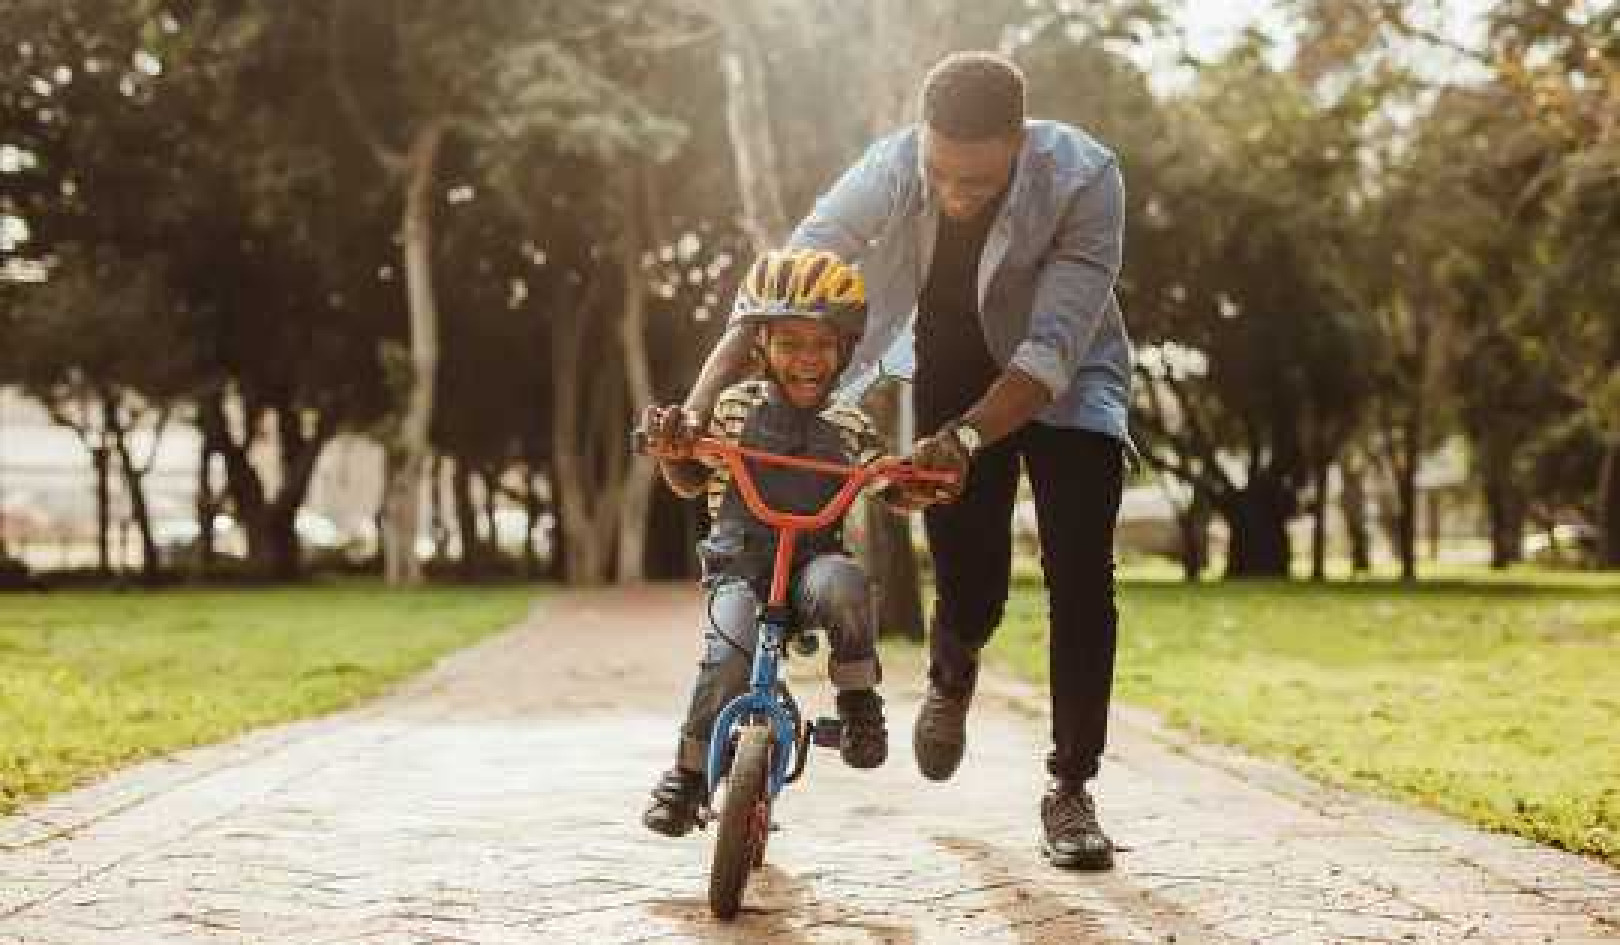 How To Bond With Your Kids According To Neuroscience